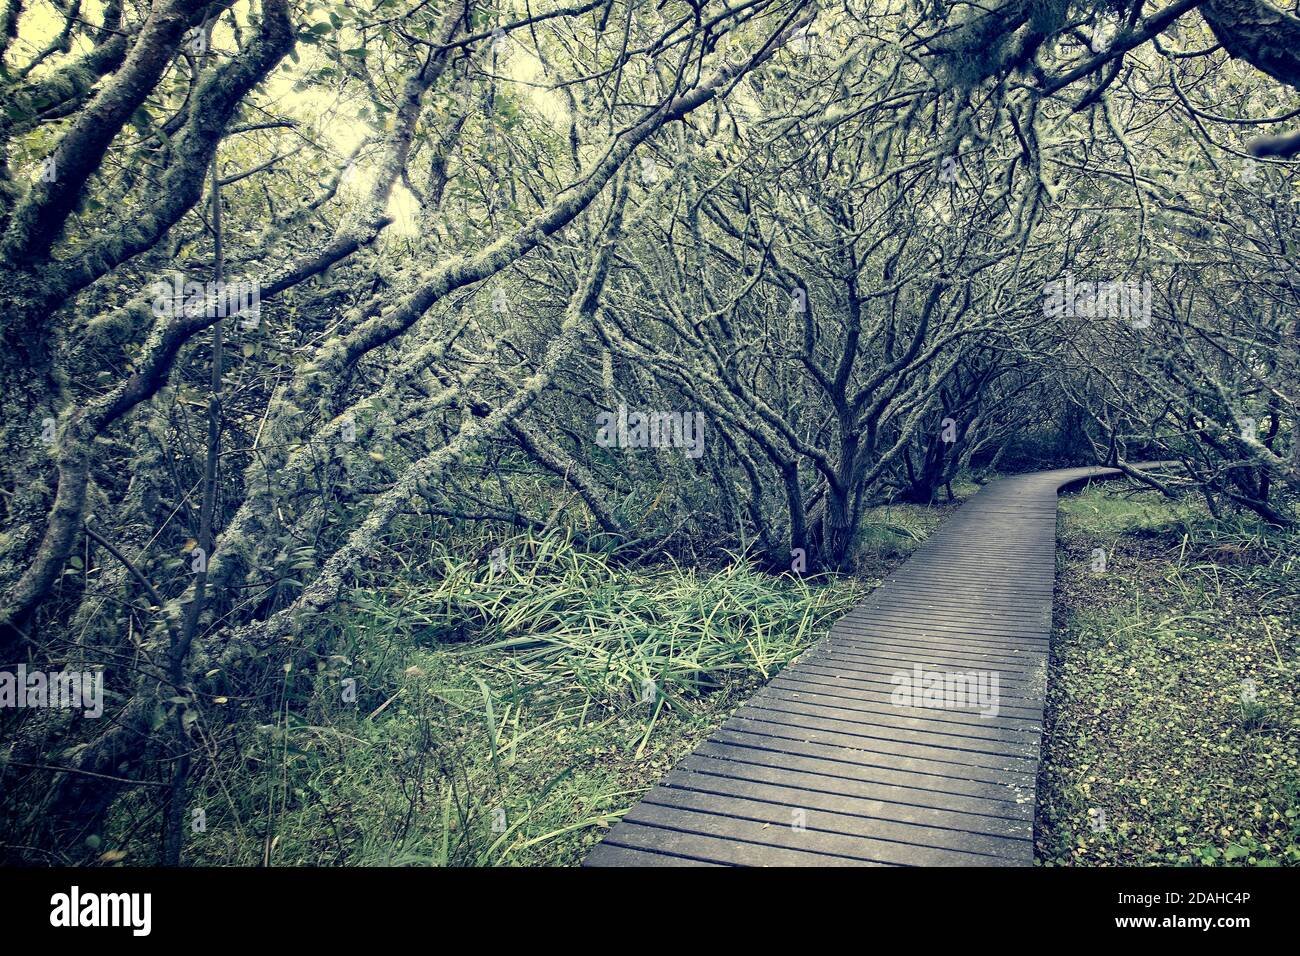 'Enchanted Wood'. Path through woodland, Lower Moors, St Mary's, Isles of Scilly, Cornwall, England, UK. Stock Photo